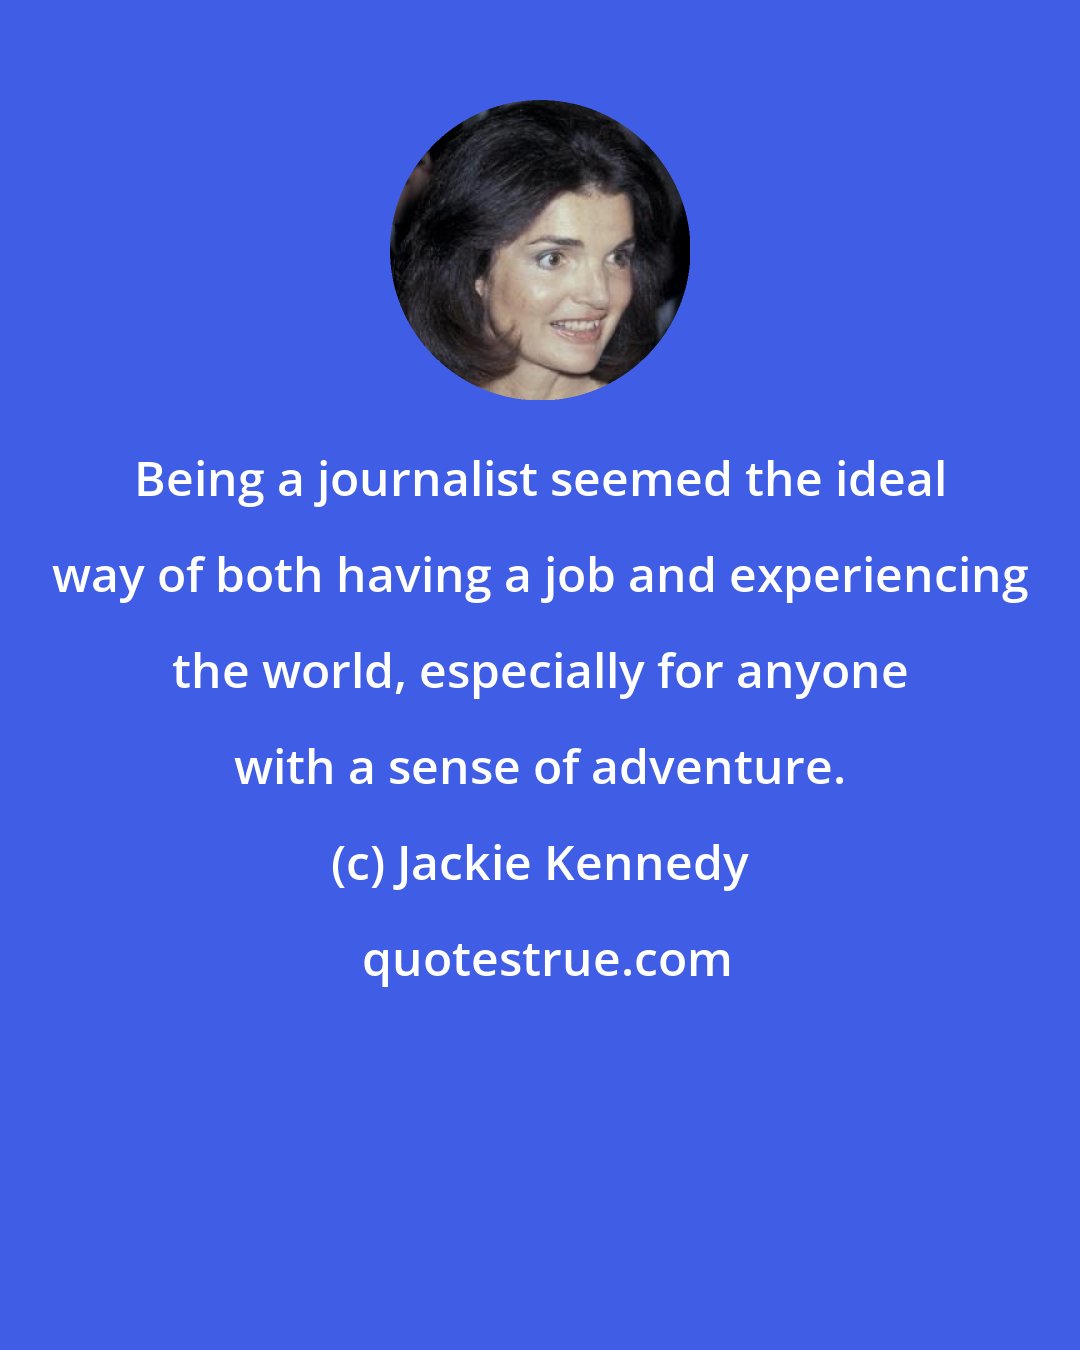 Jackie Kennedy: Being a journalist seemed the ideal way of both having a job and experiencing the world, especially for anyone with a sense of adventure.